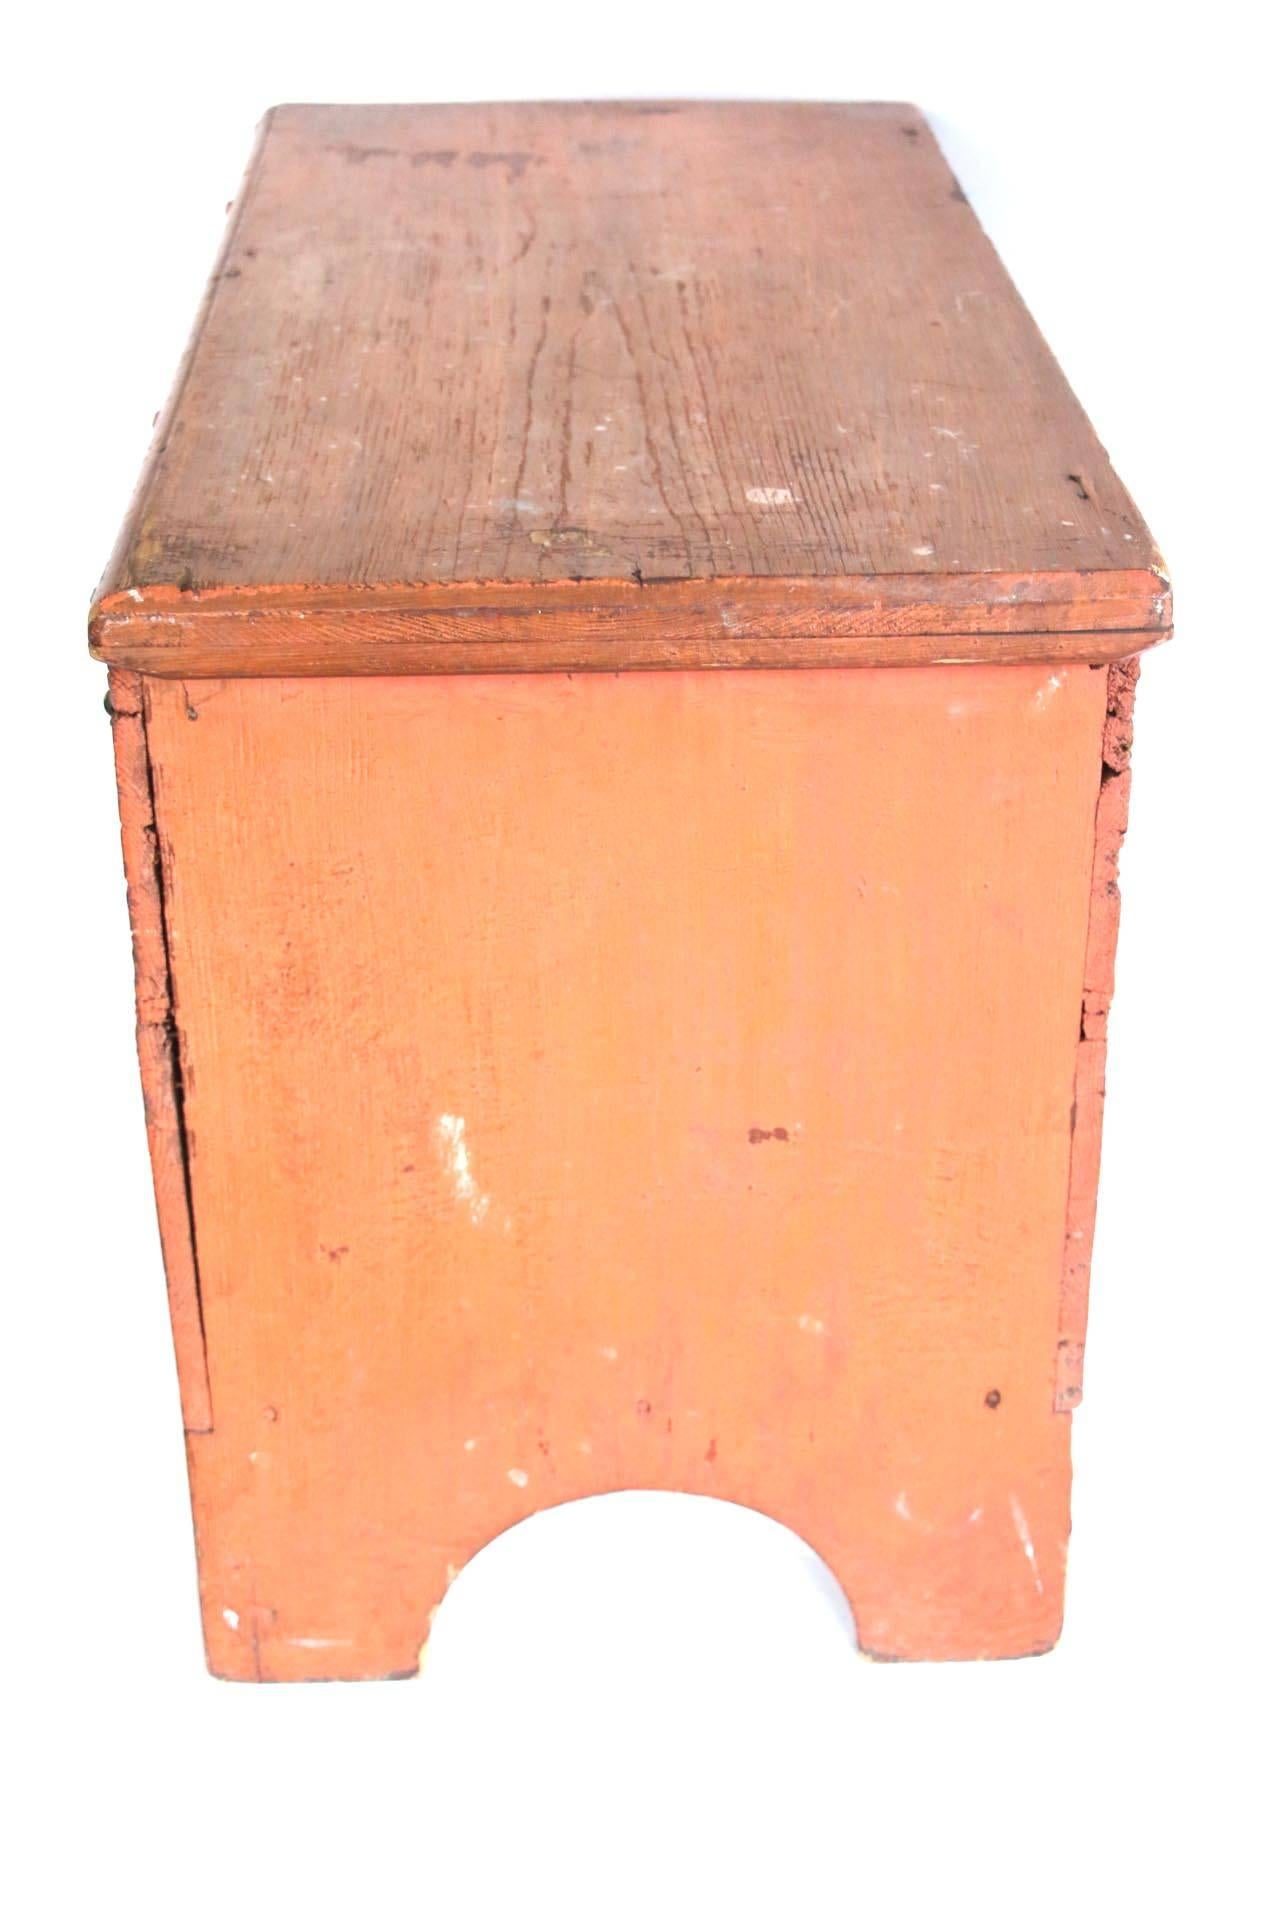 Early 19th Century Child's Painted Blanket Chest For Sale 2